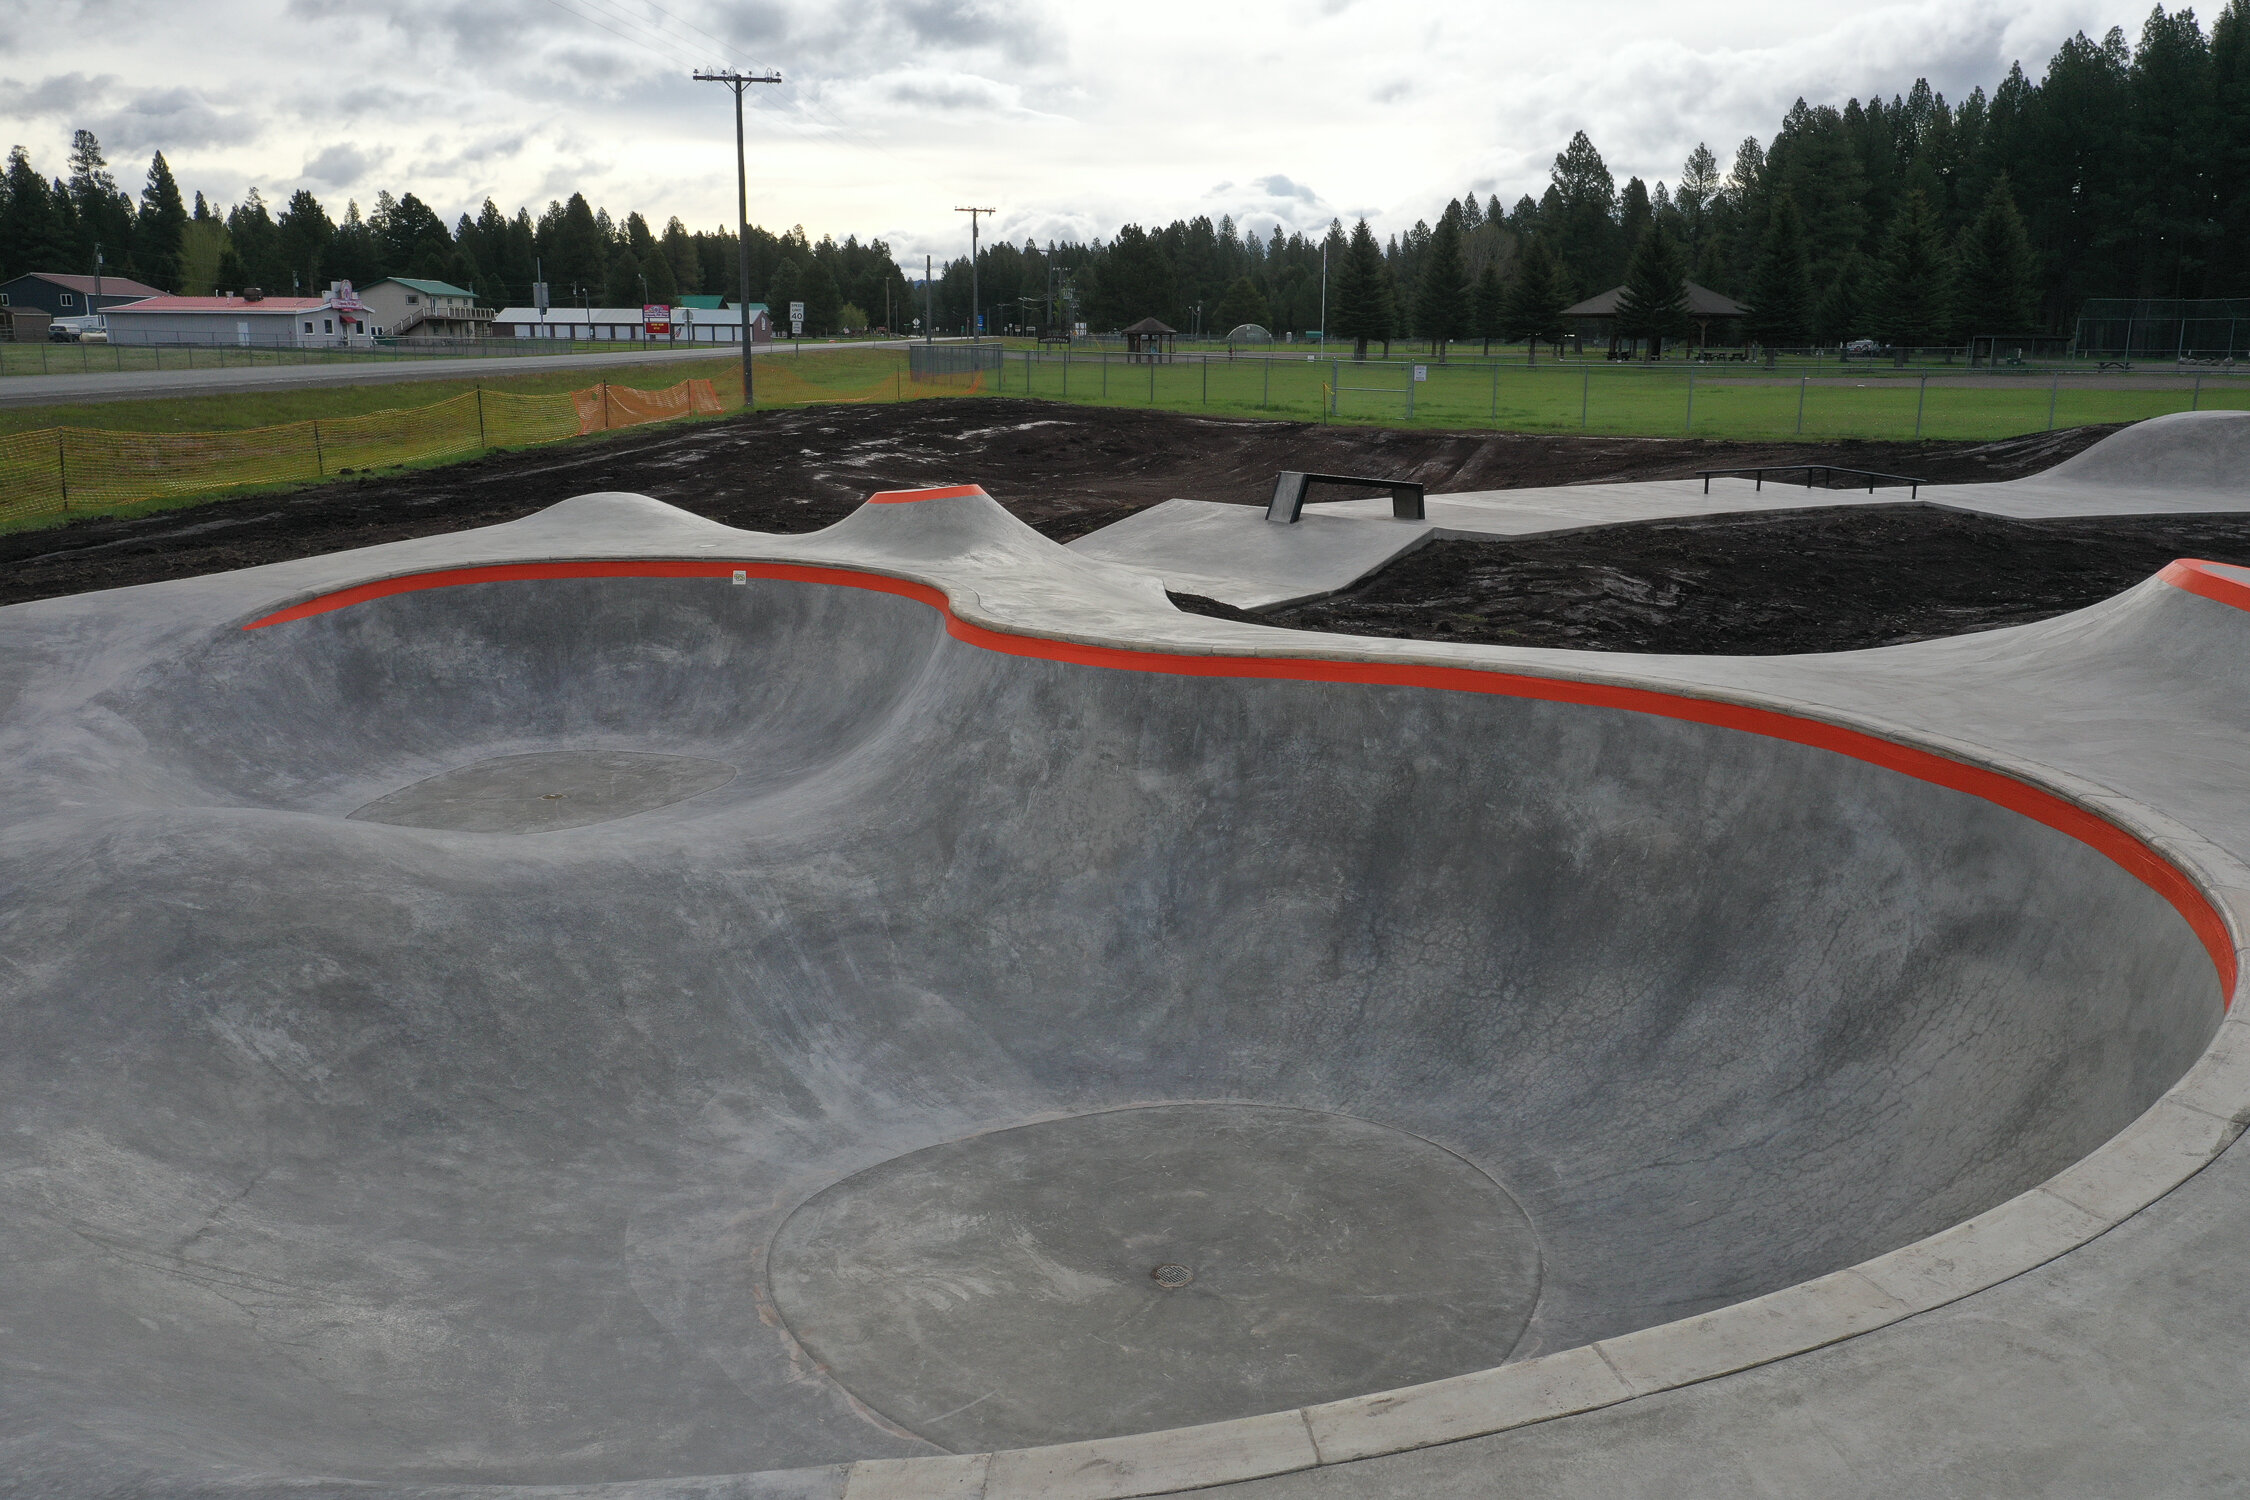 The lovely Lincoln, Montana skate path has many well laid out features in its small footprint 💯